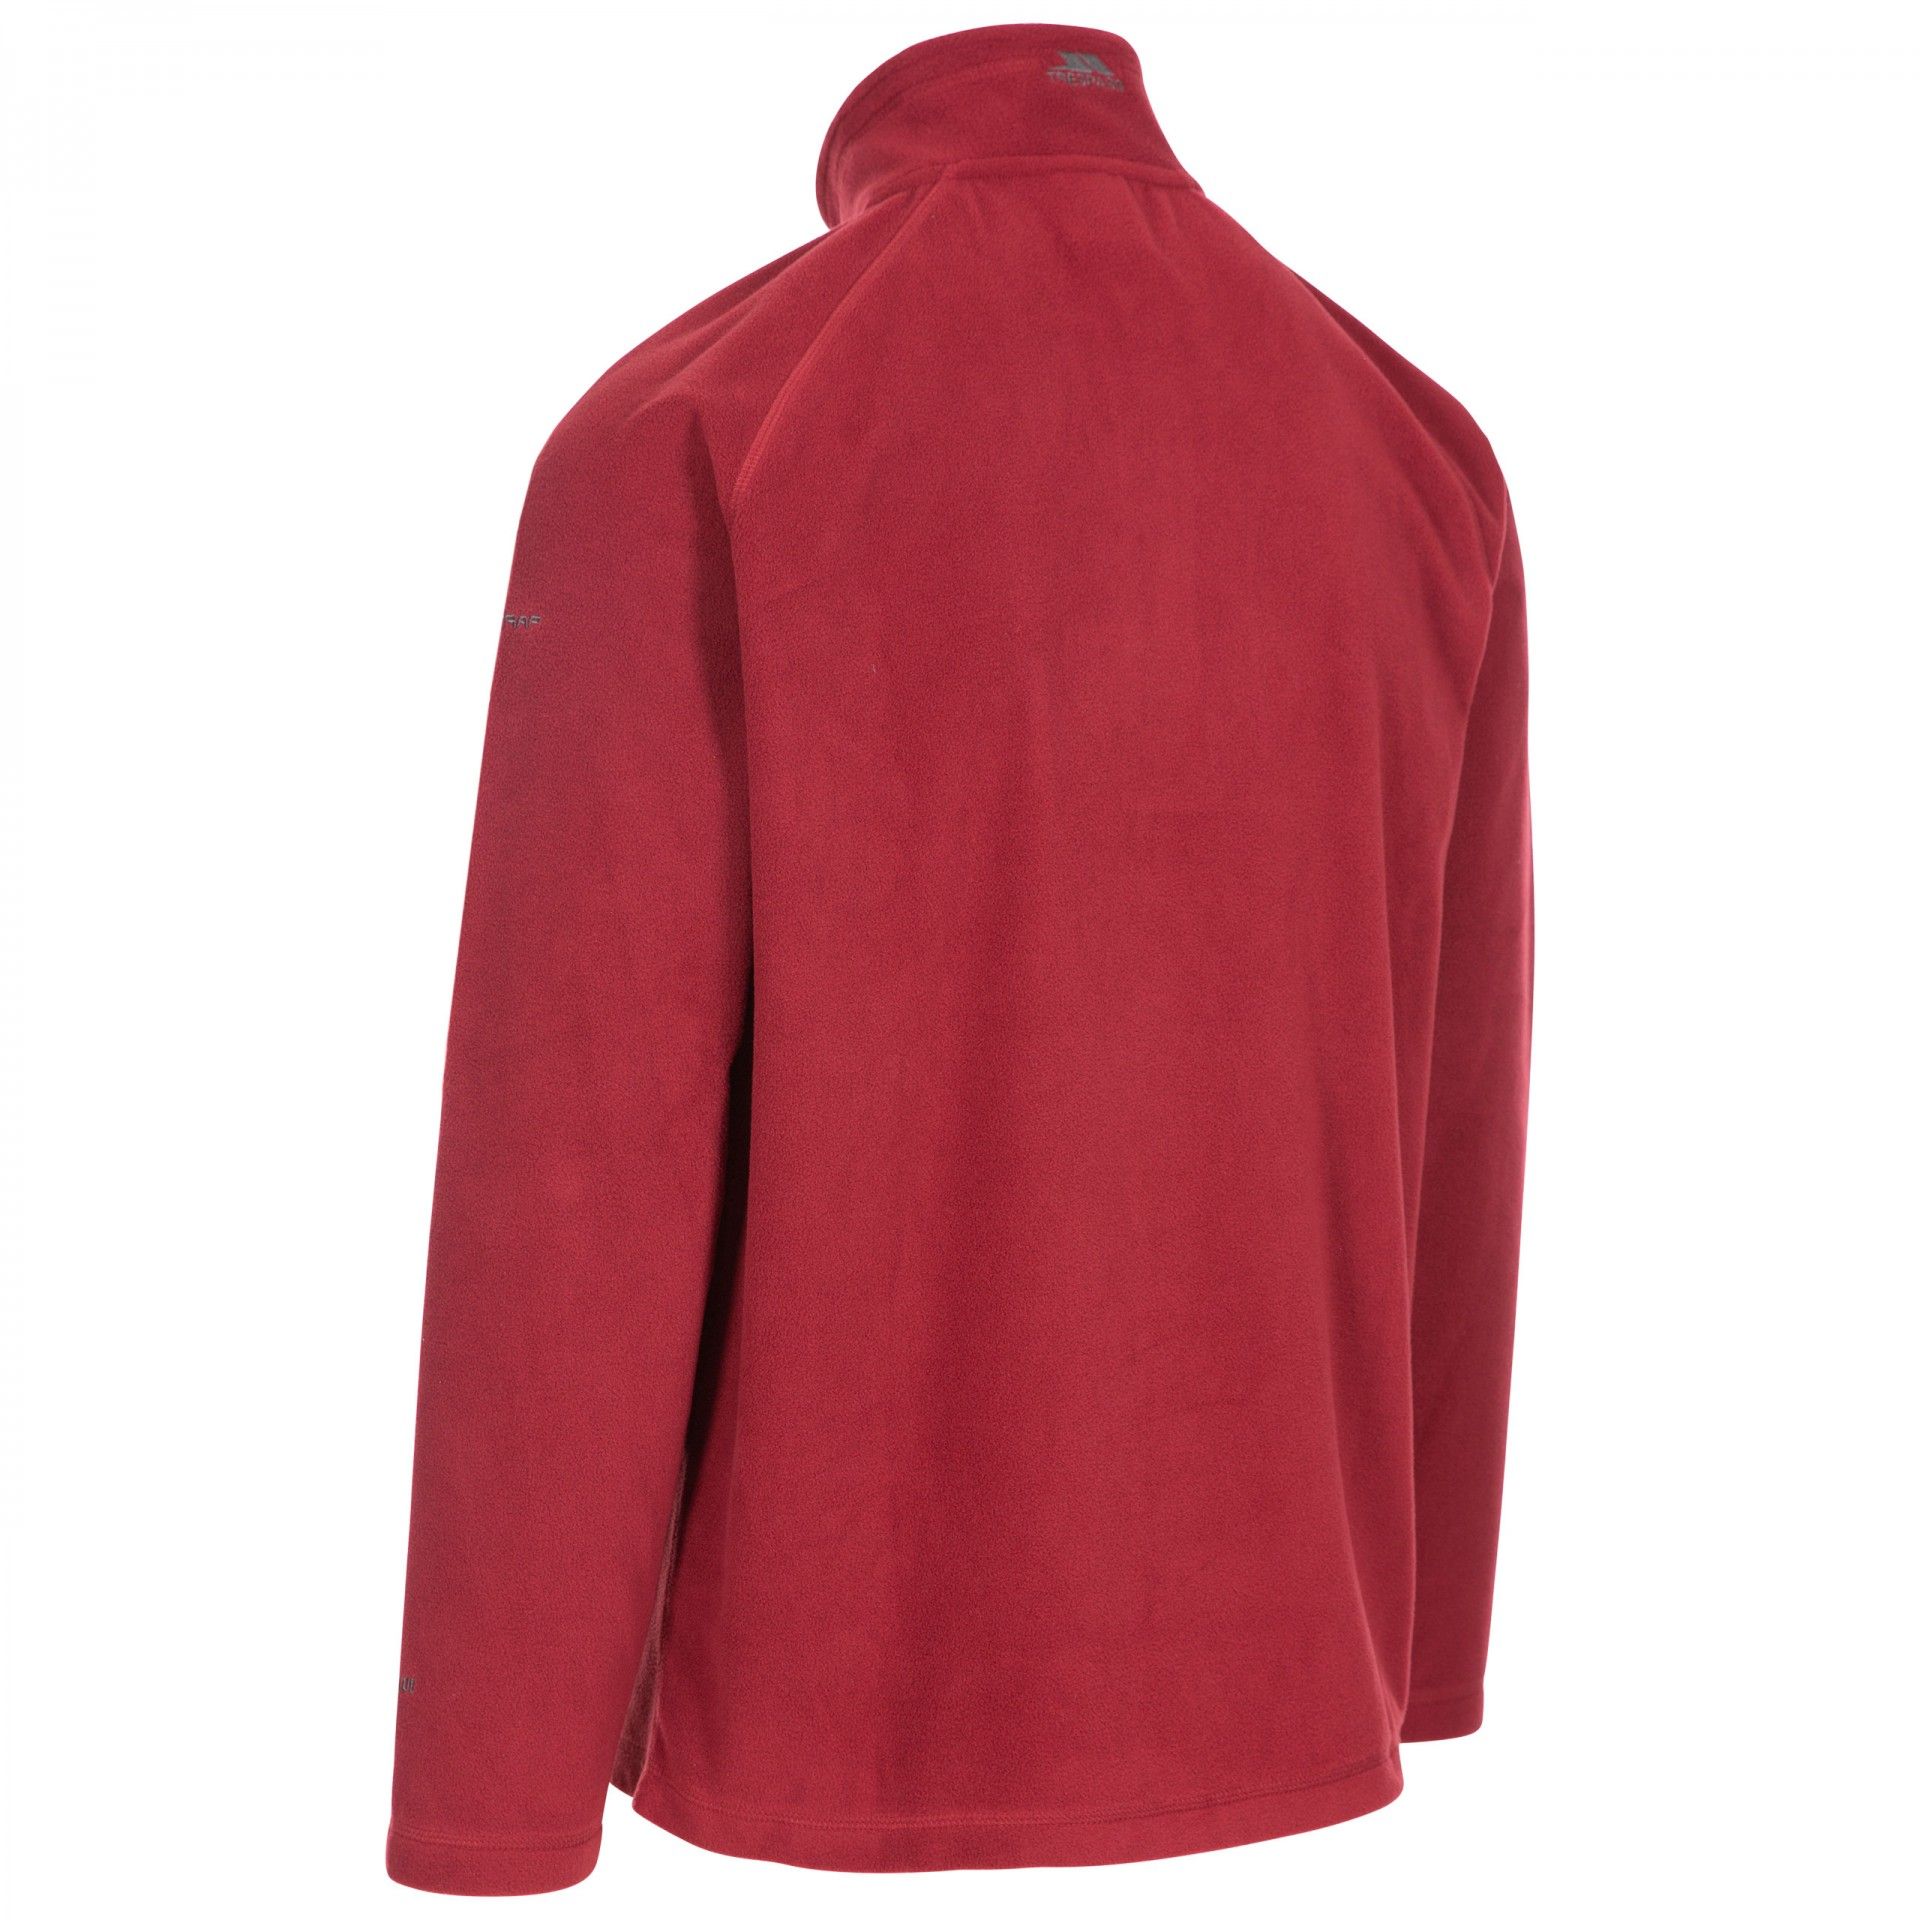 Knitted. 100% Polyester. 180gsm. Long sleeves. Microfleece. Anti-piling.